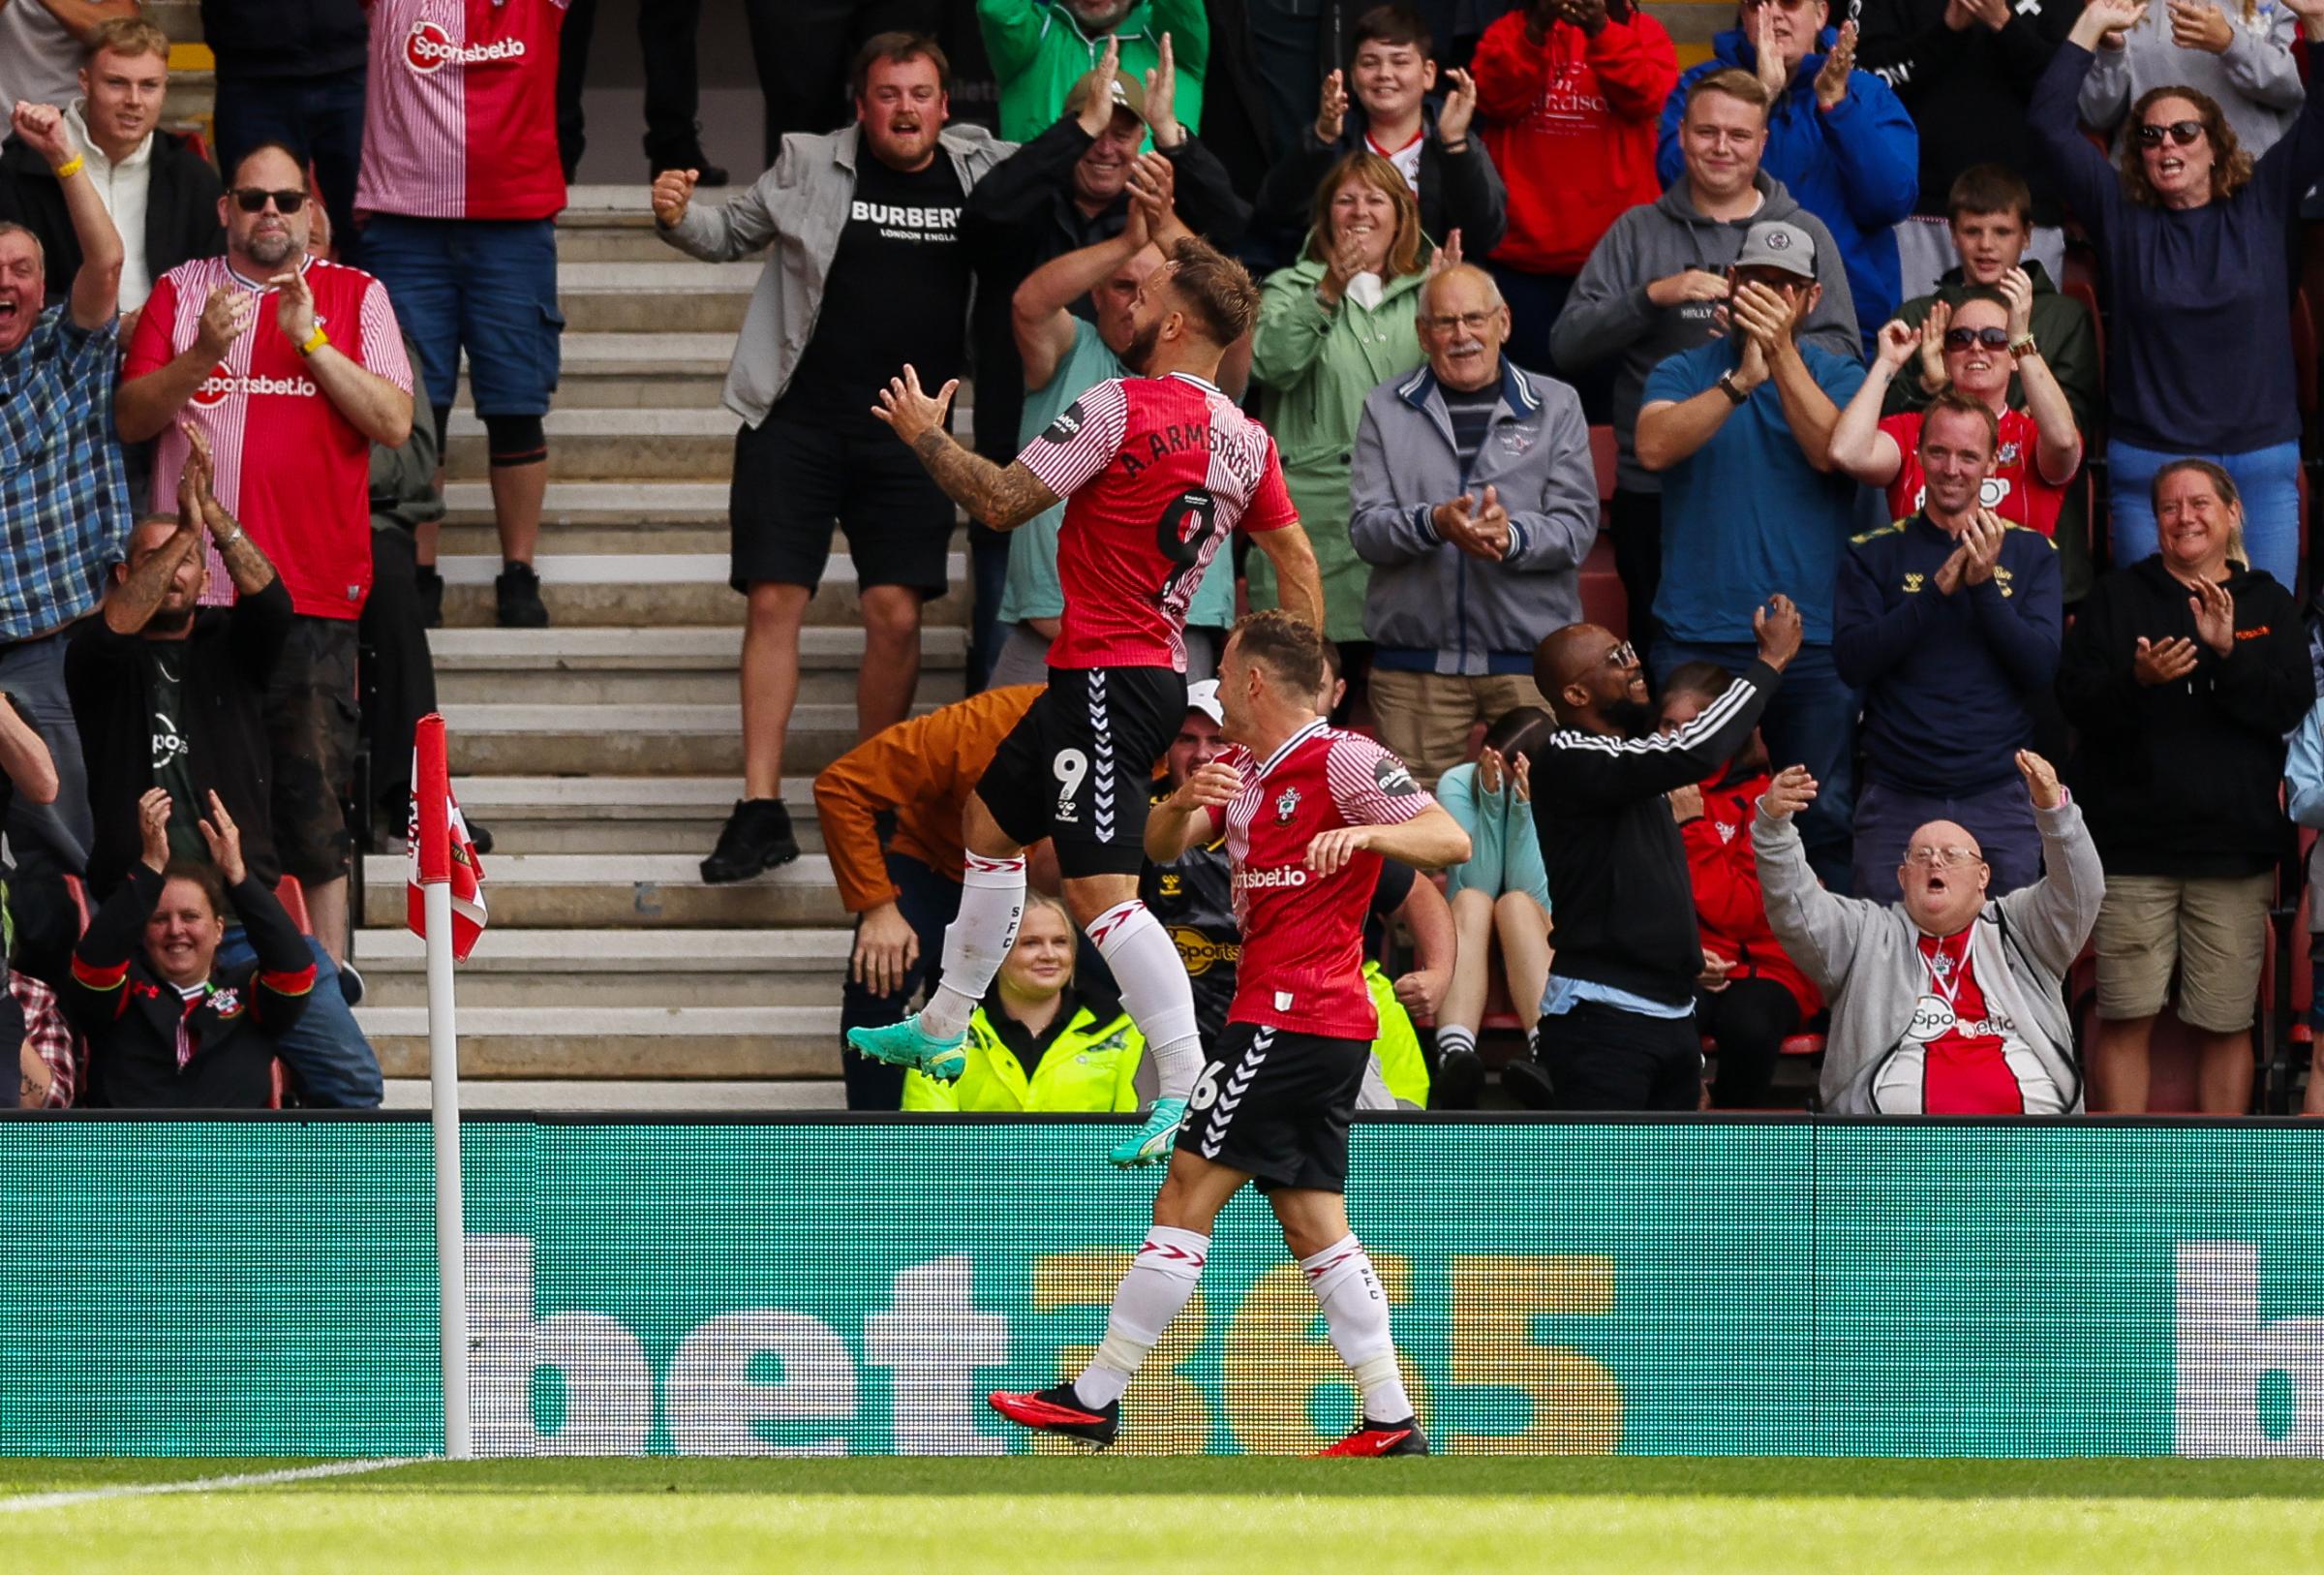 Southampton get over the line despite noise with home win against QPR